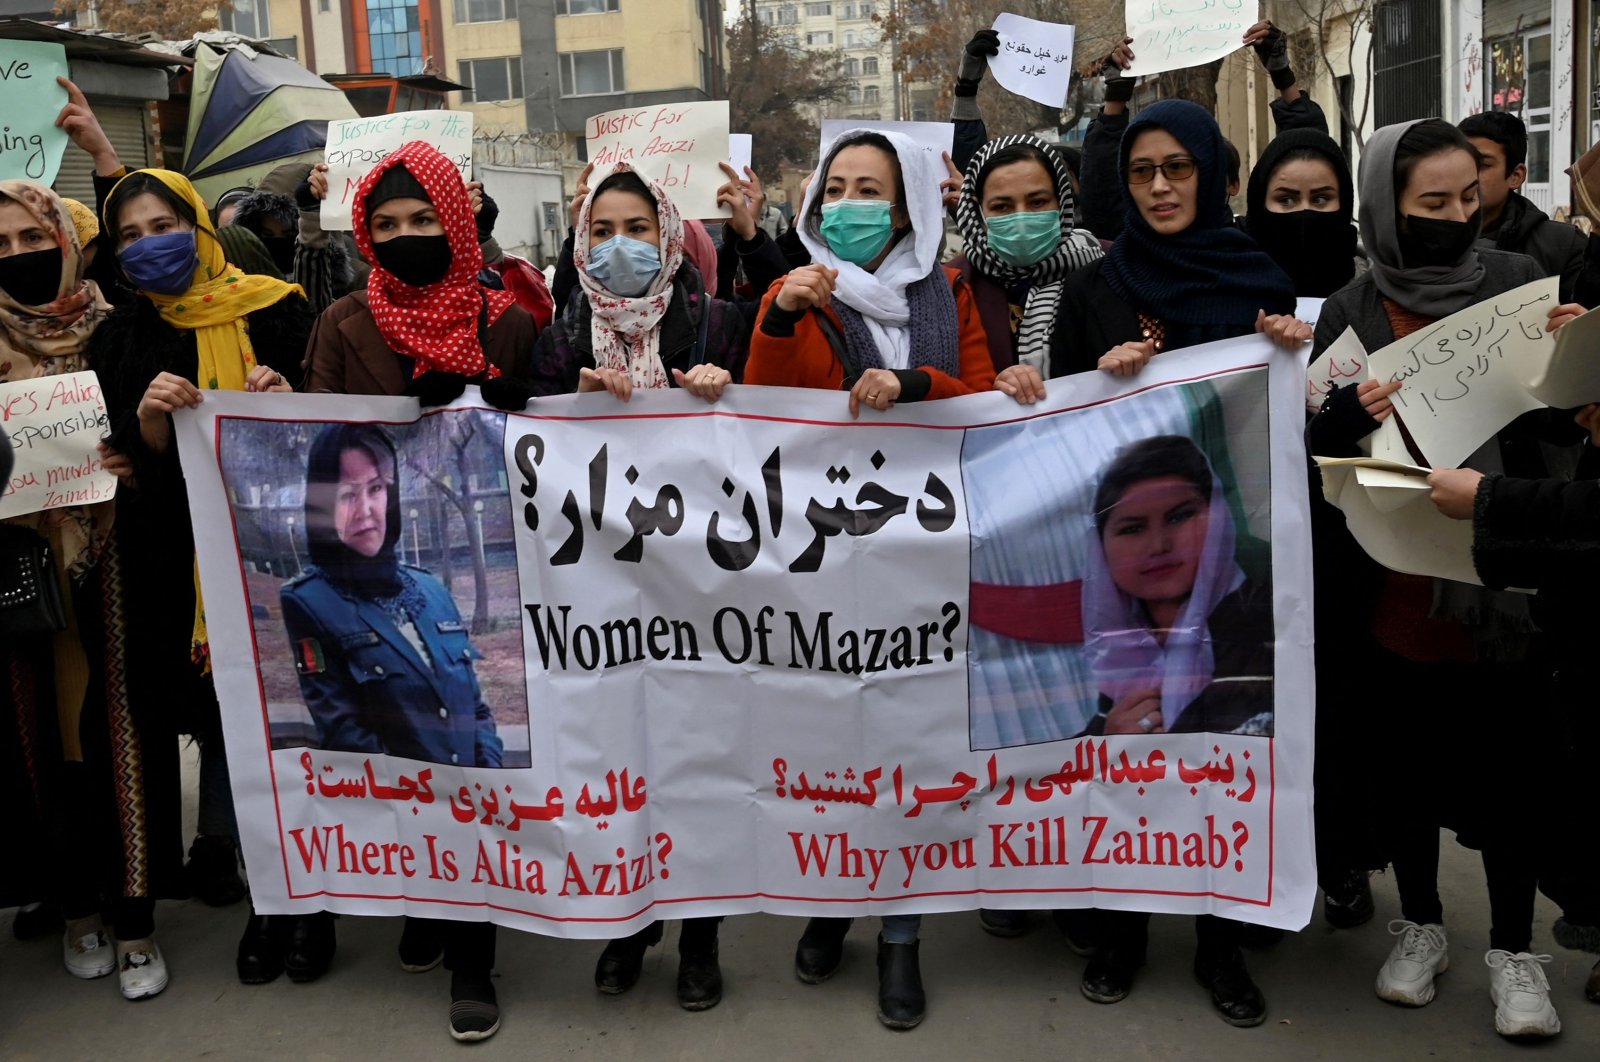 Afghan women chant slogans and hold banners during a women&#039;s rights protest march in Kabul, Afghanistan, Jan. 16, 2022. (AFP Photo)